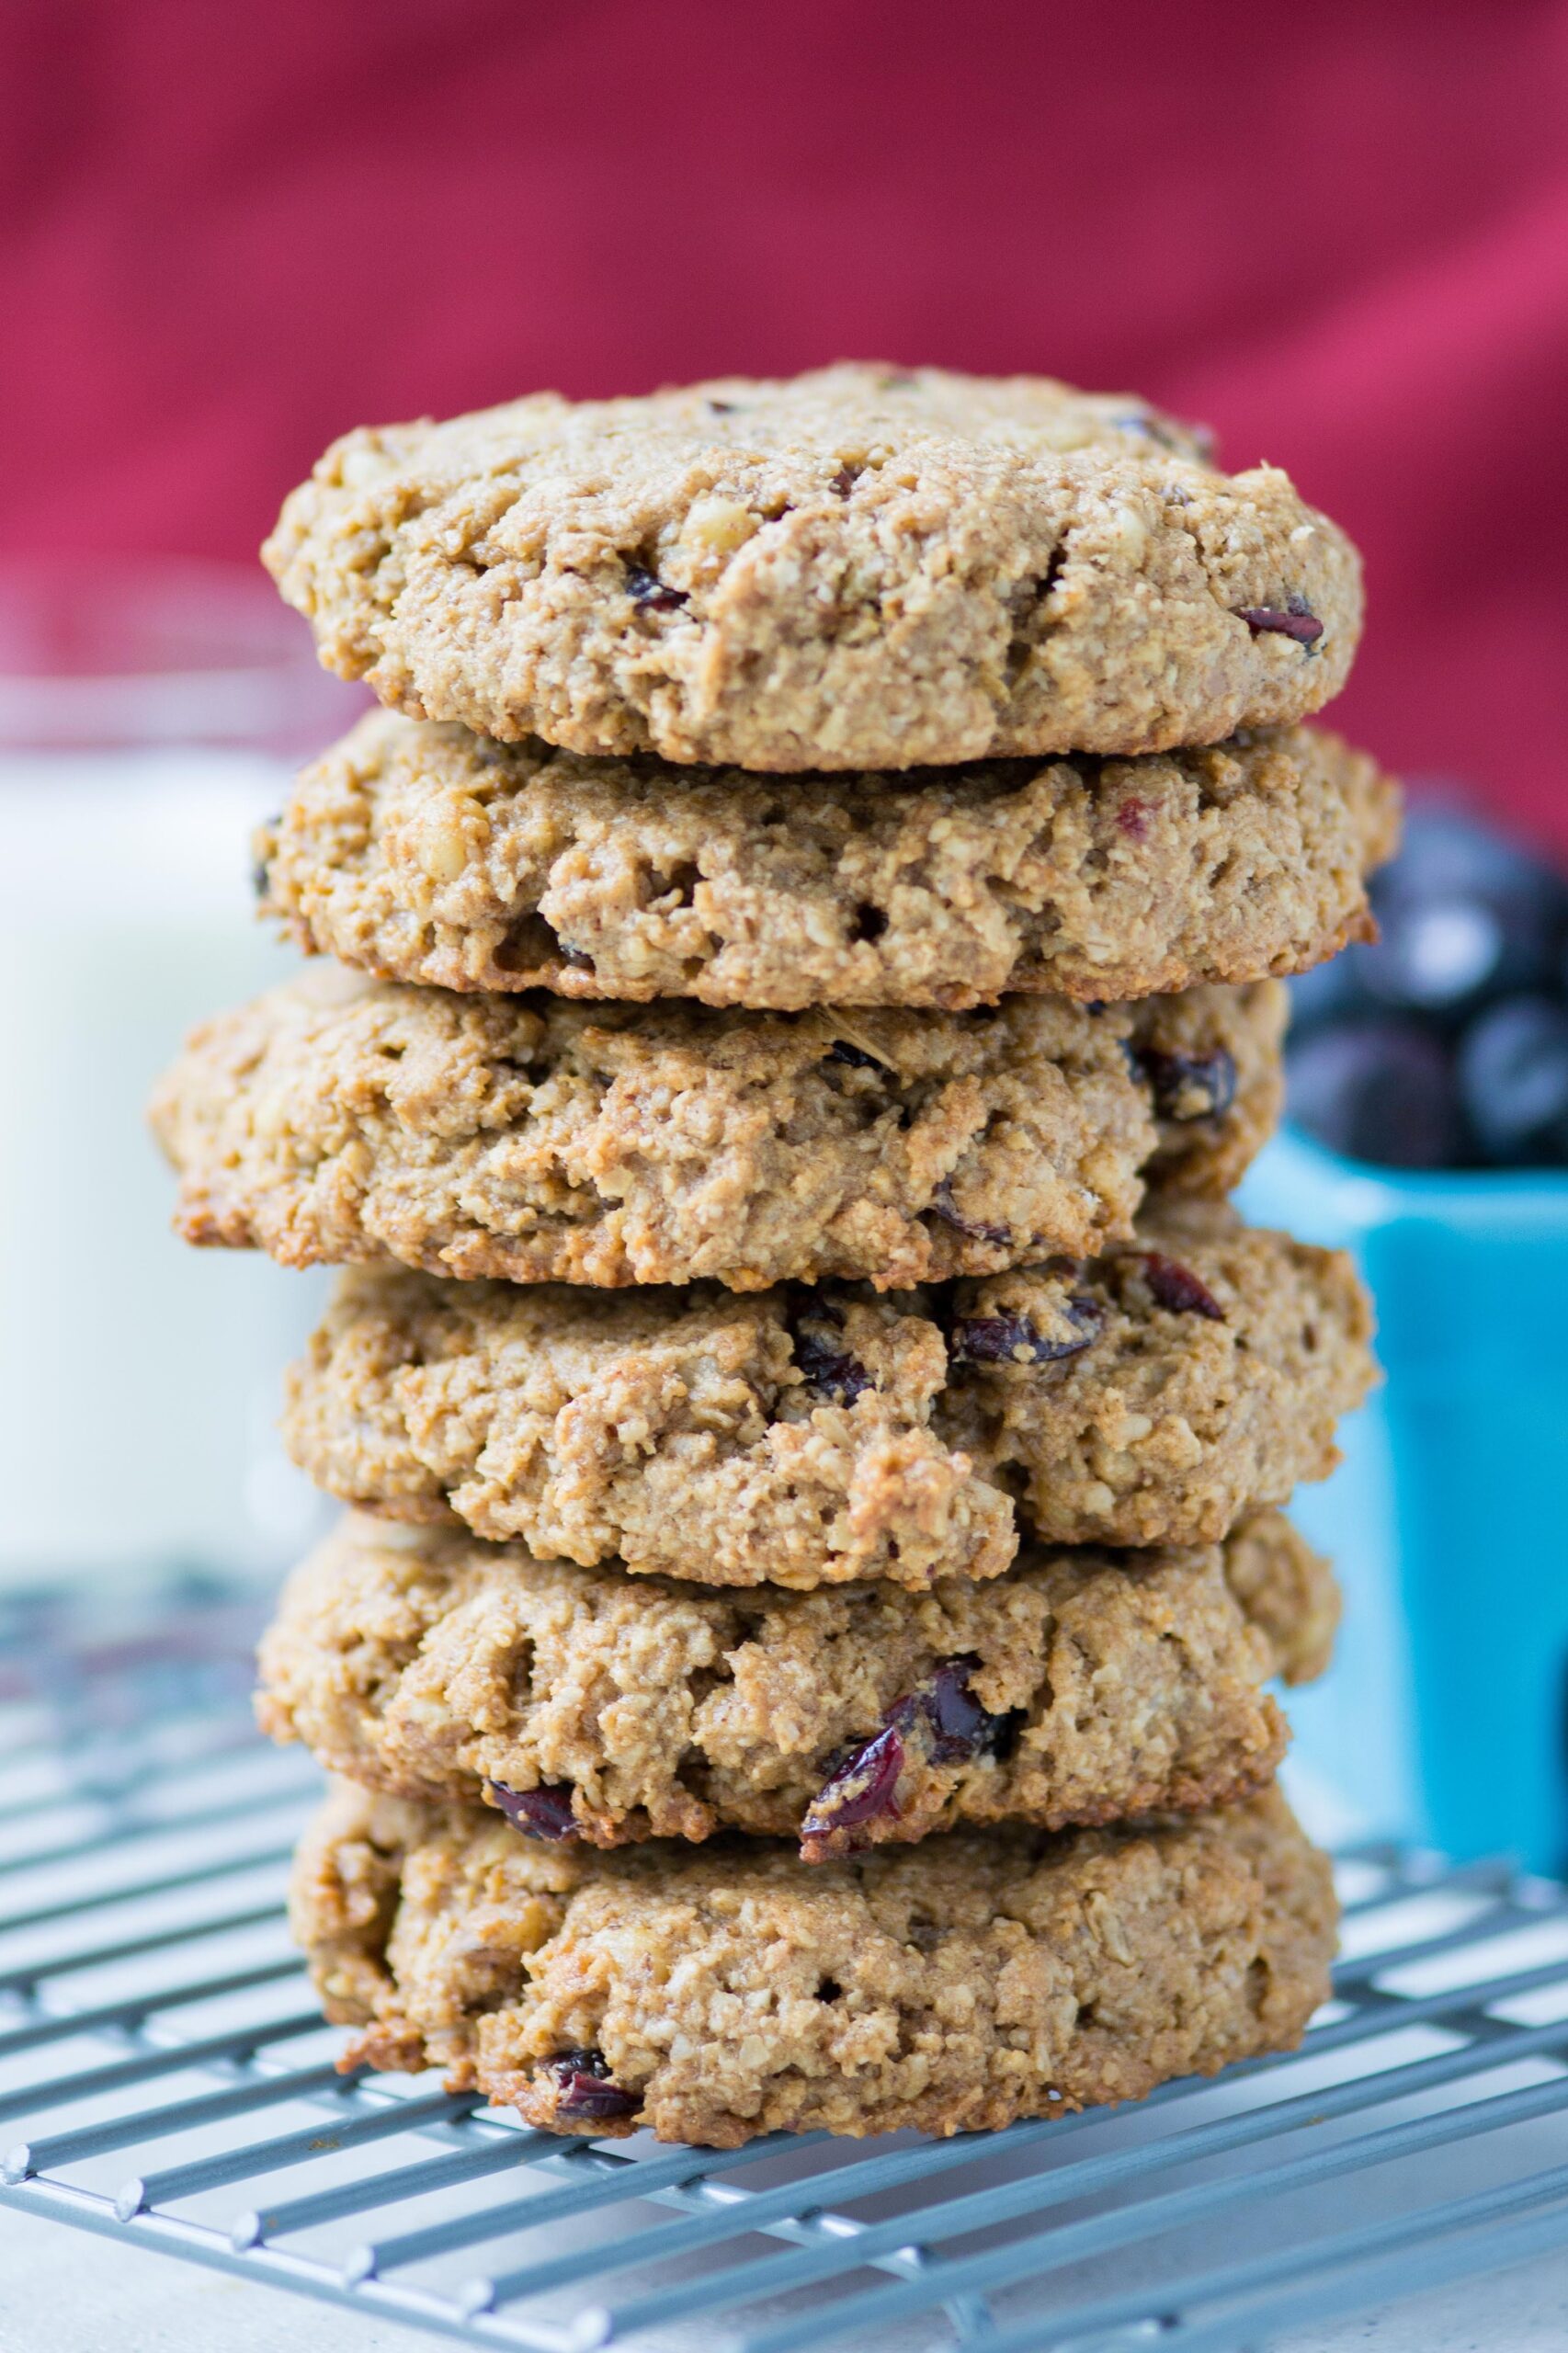  Get your daily dose of whole grains with these tasty Brown Rice Cookies.